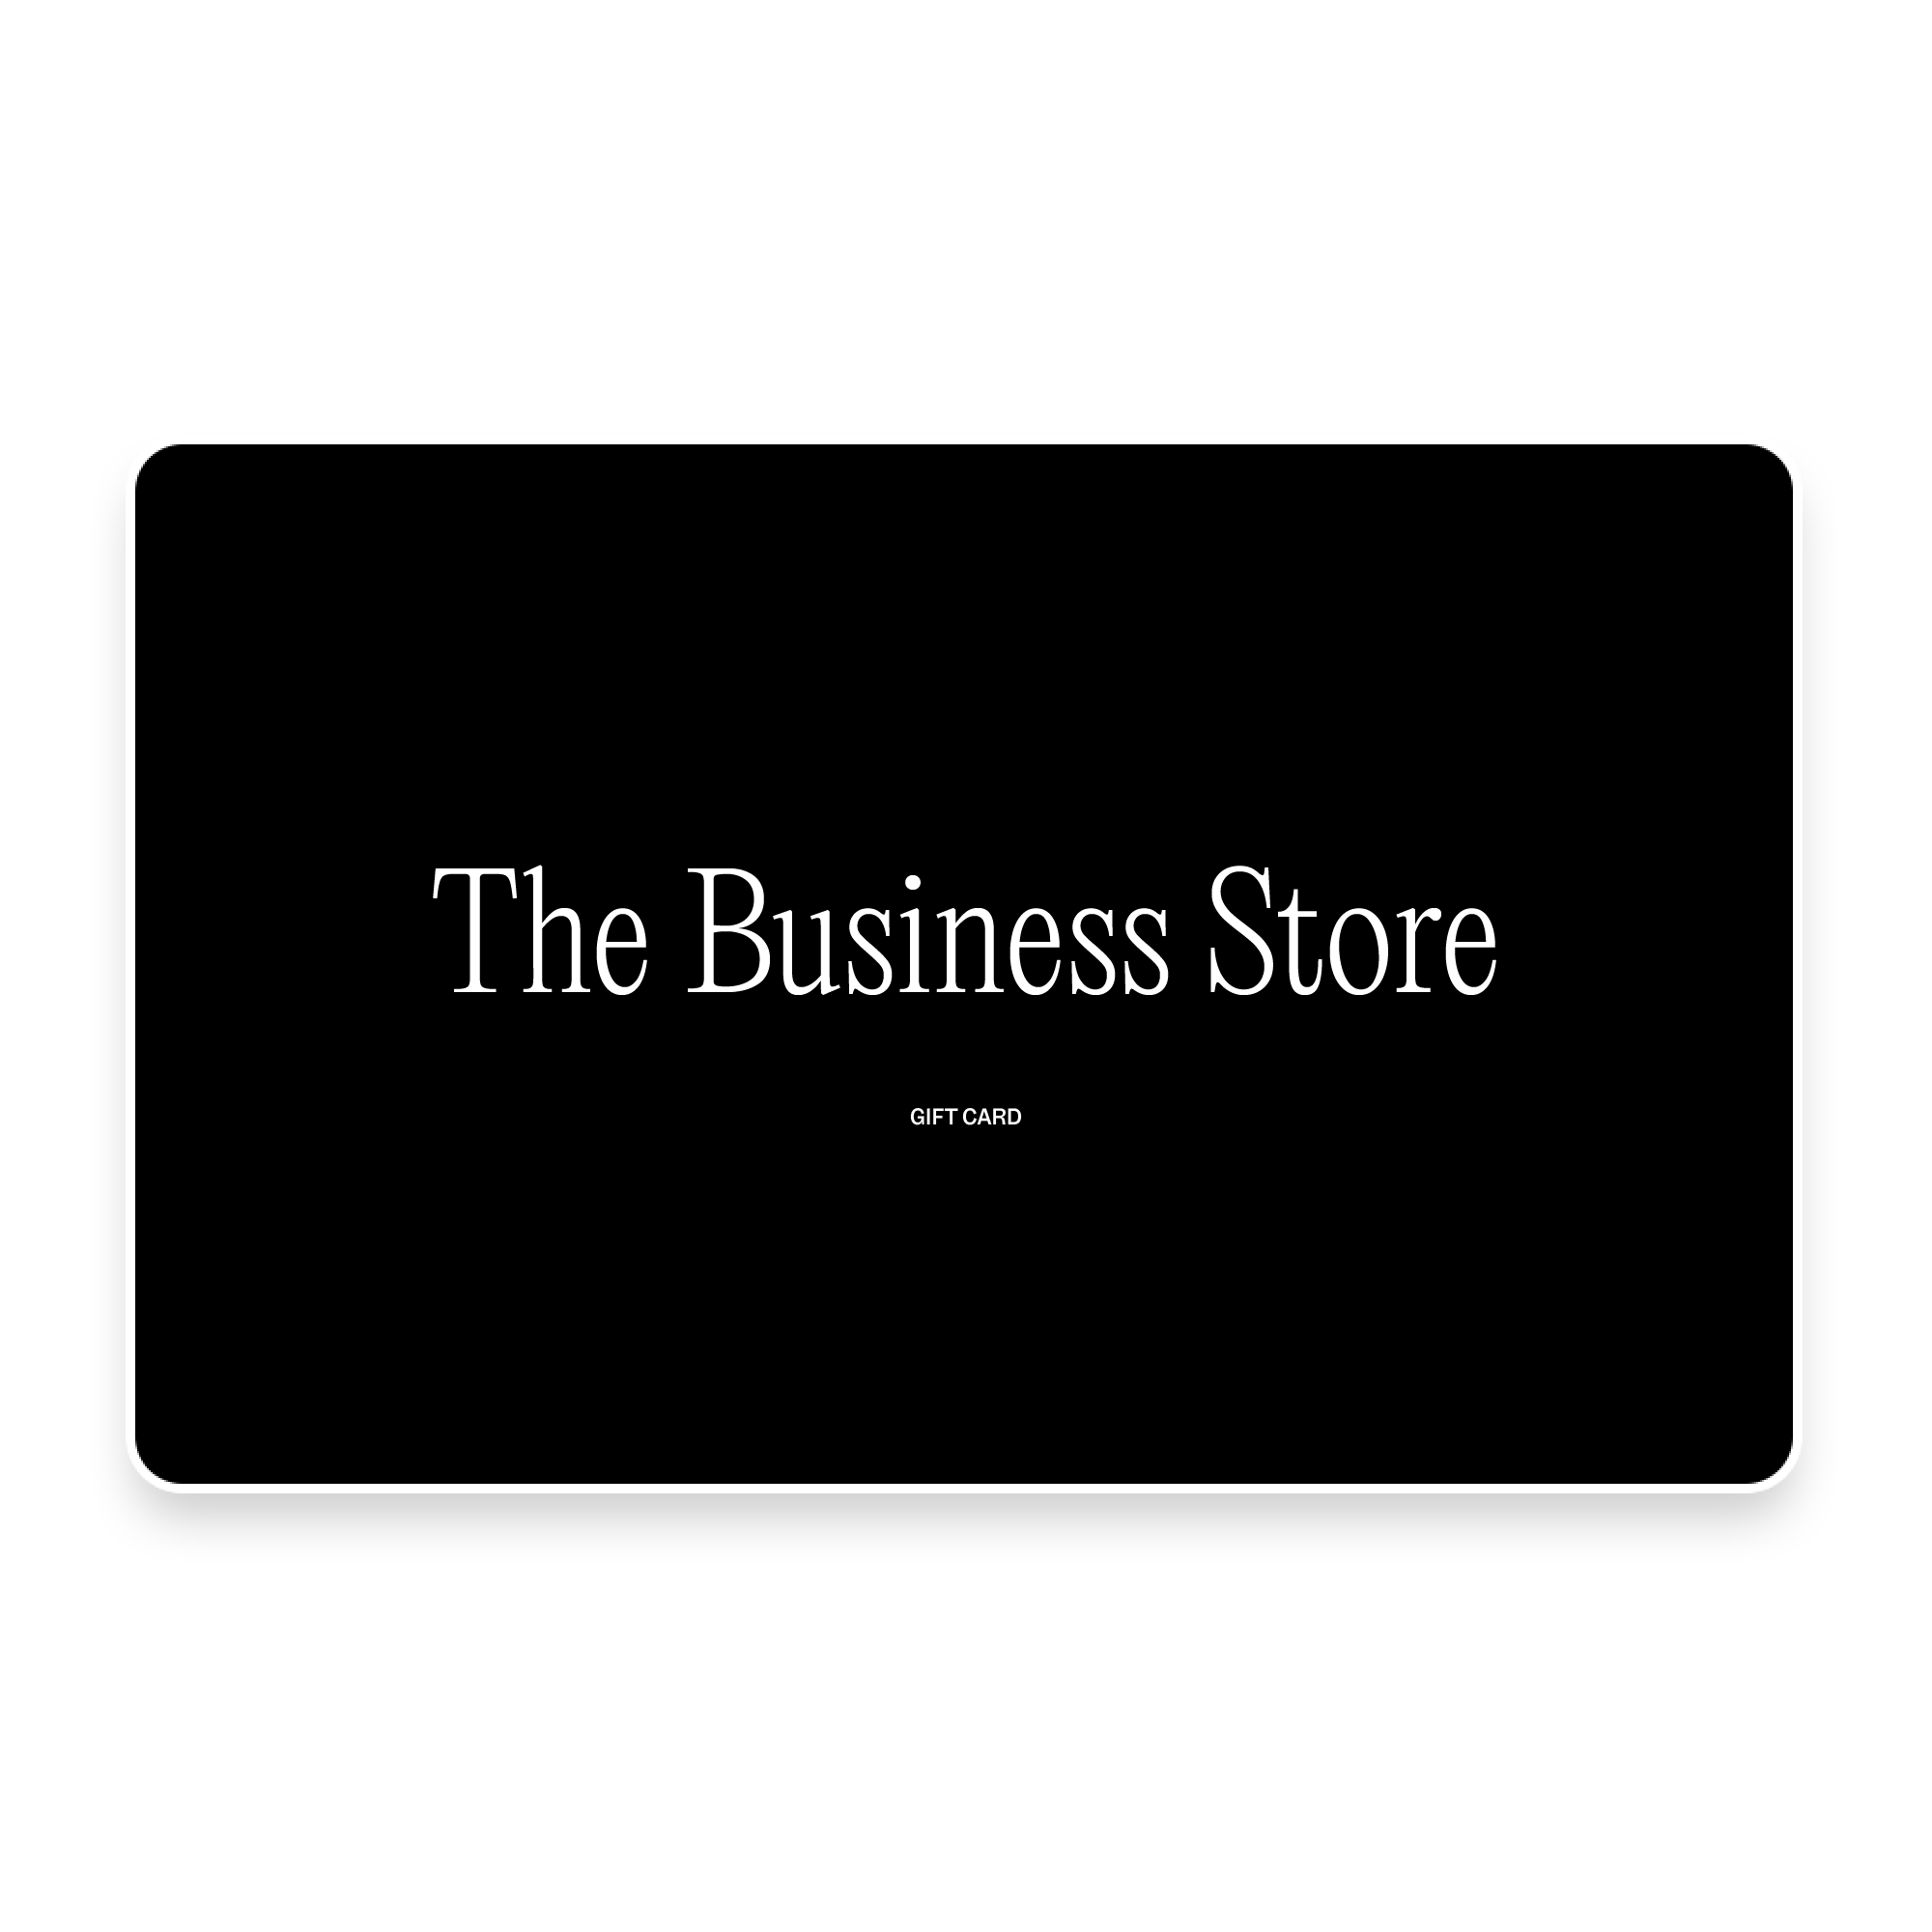 The Business Store Gift card